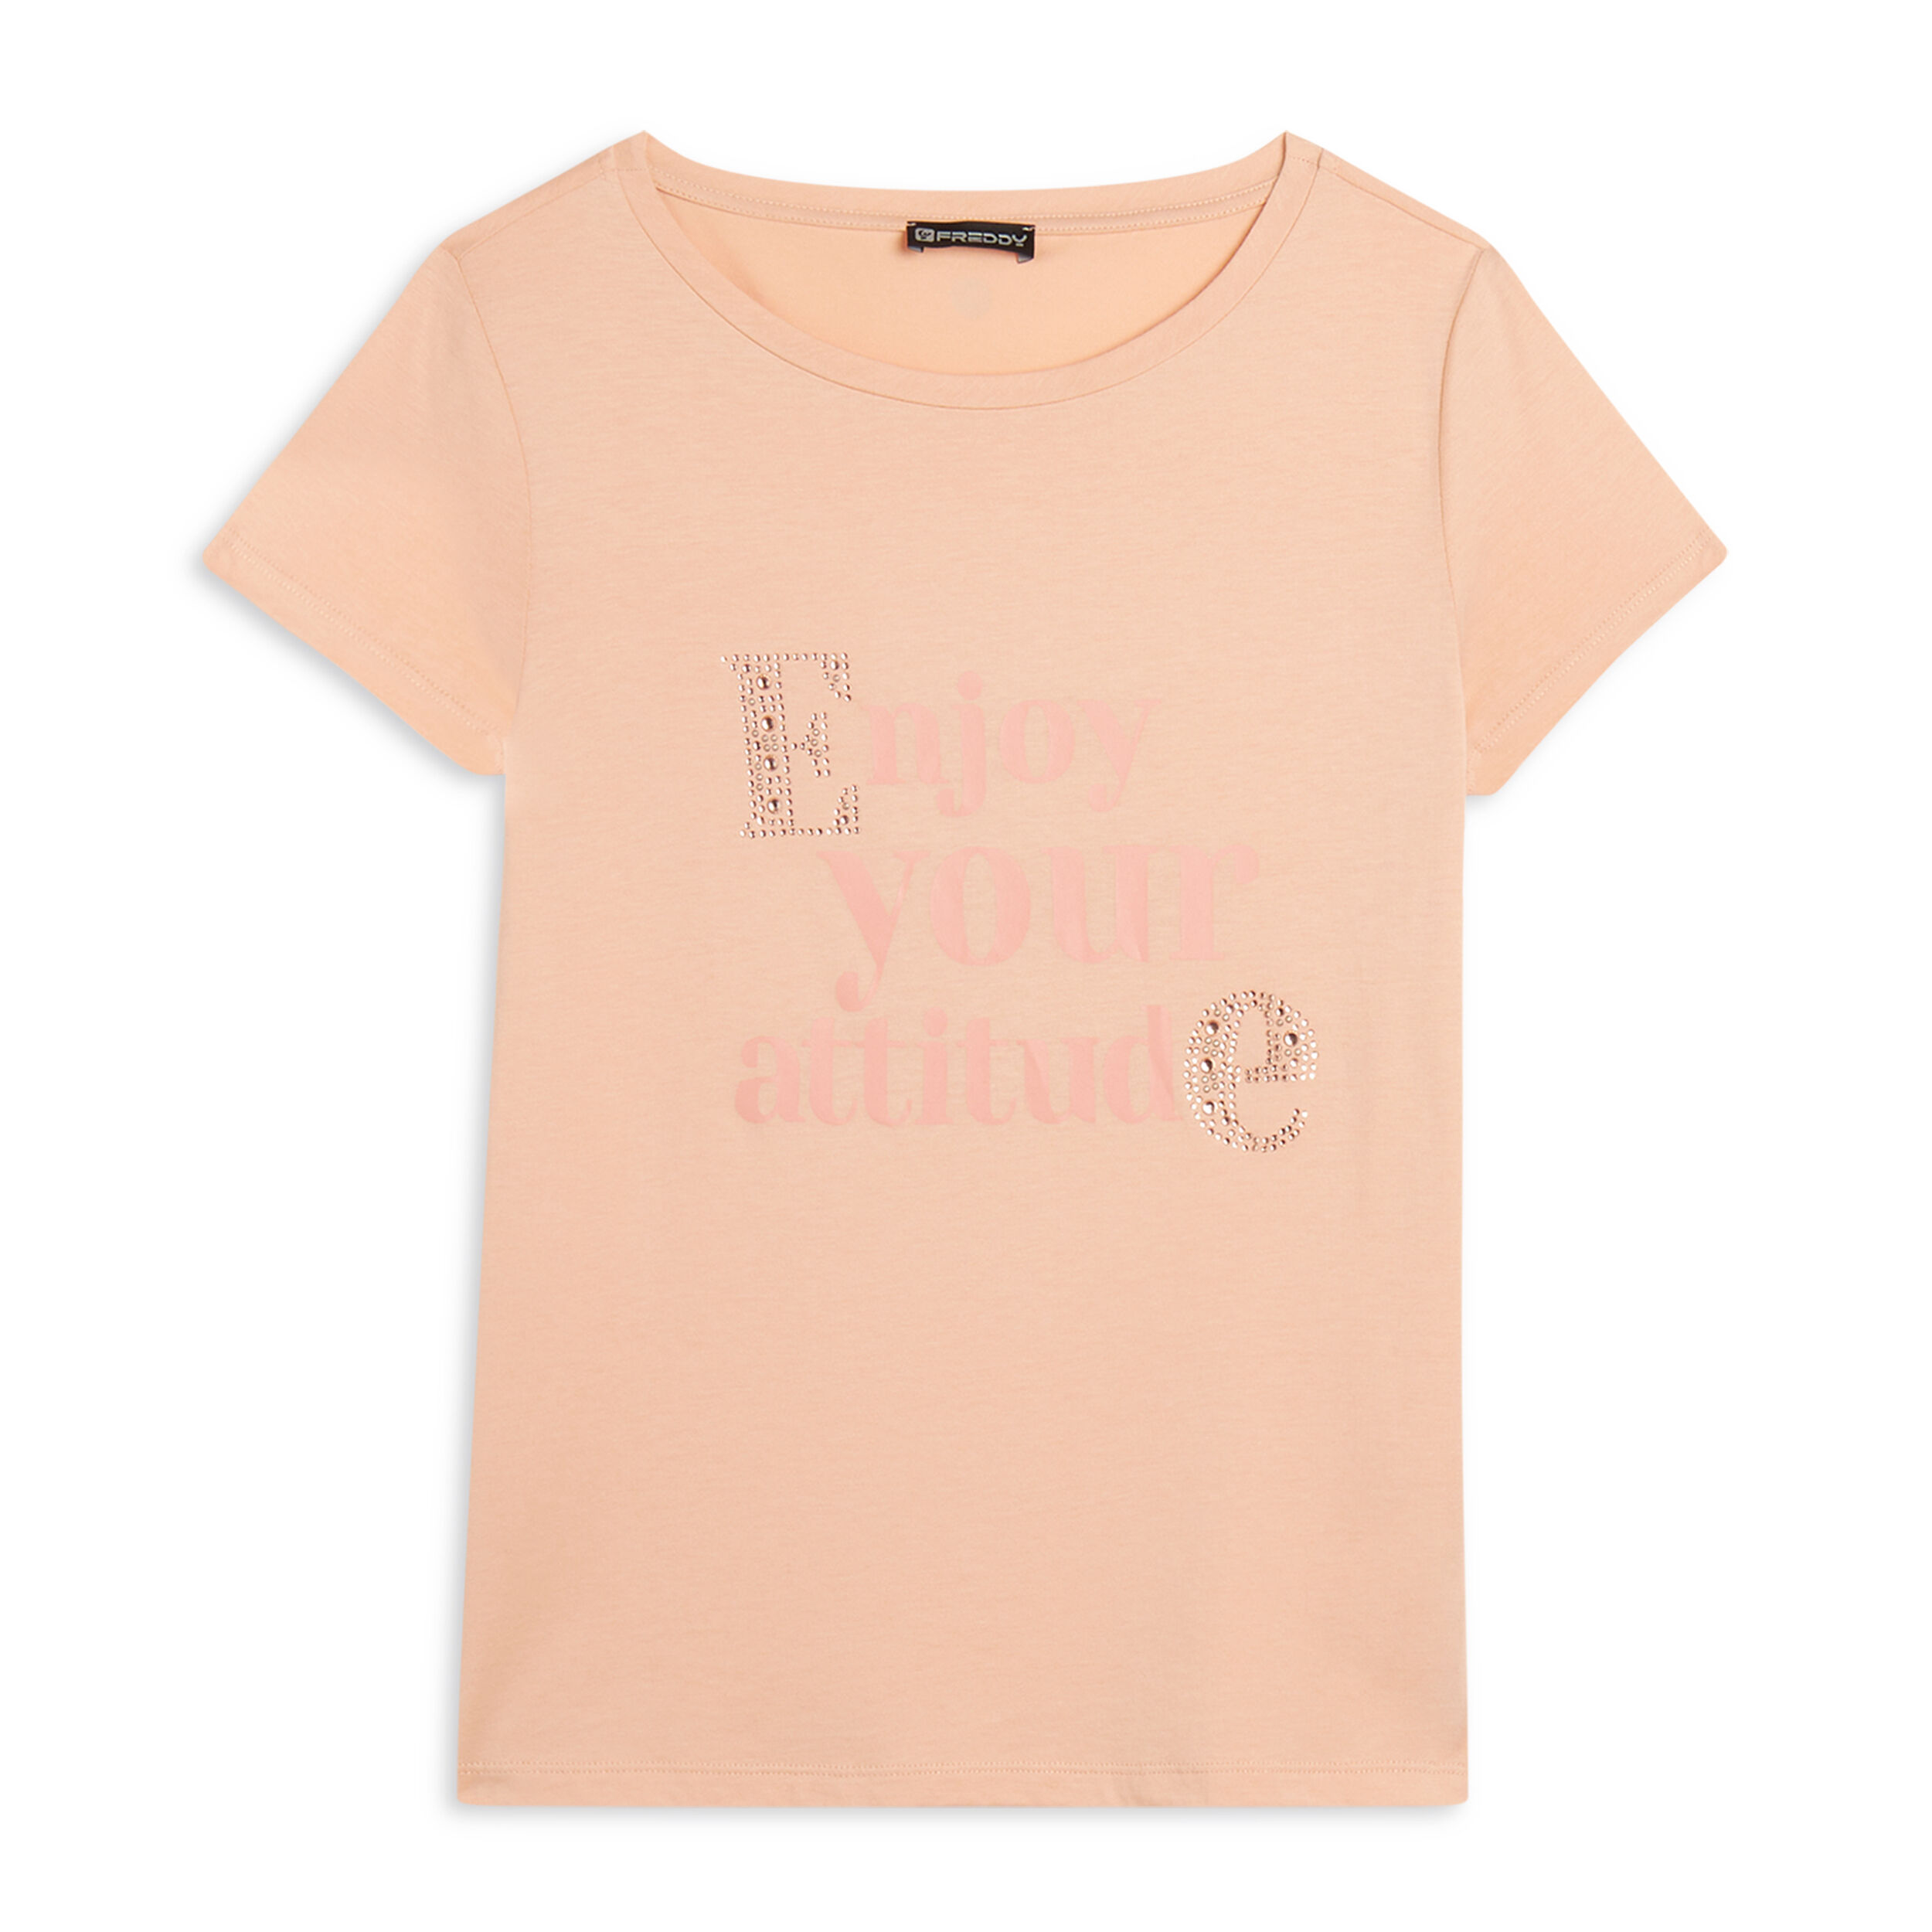 Freddy T-shirt donna in jersey modal con grafica lucida e strass Pink Sand Donna Extra Large